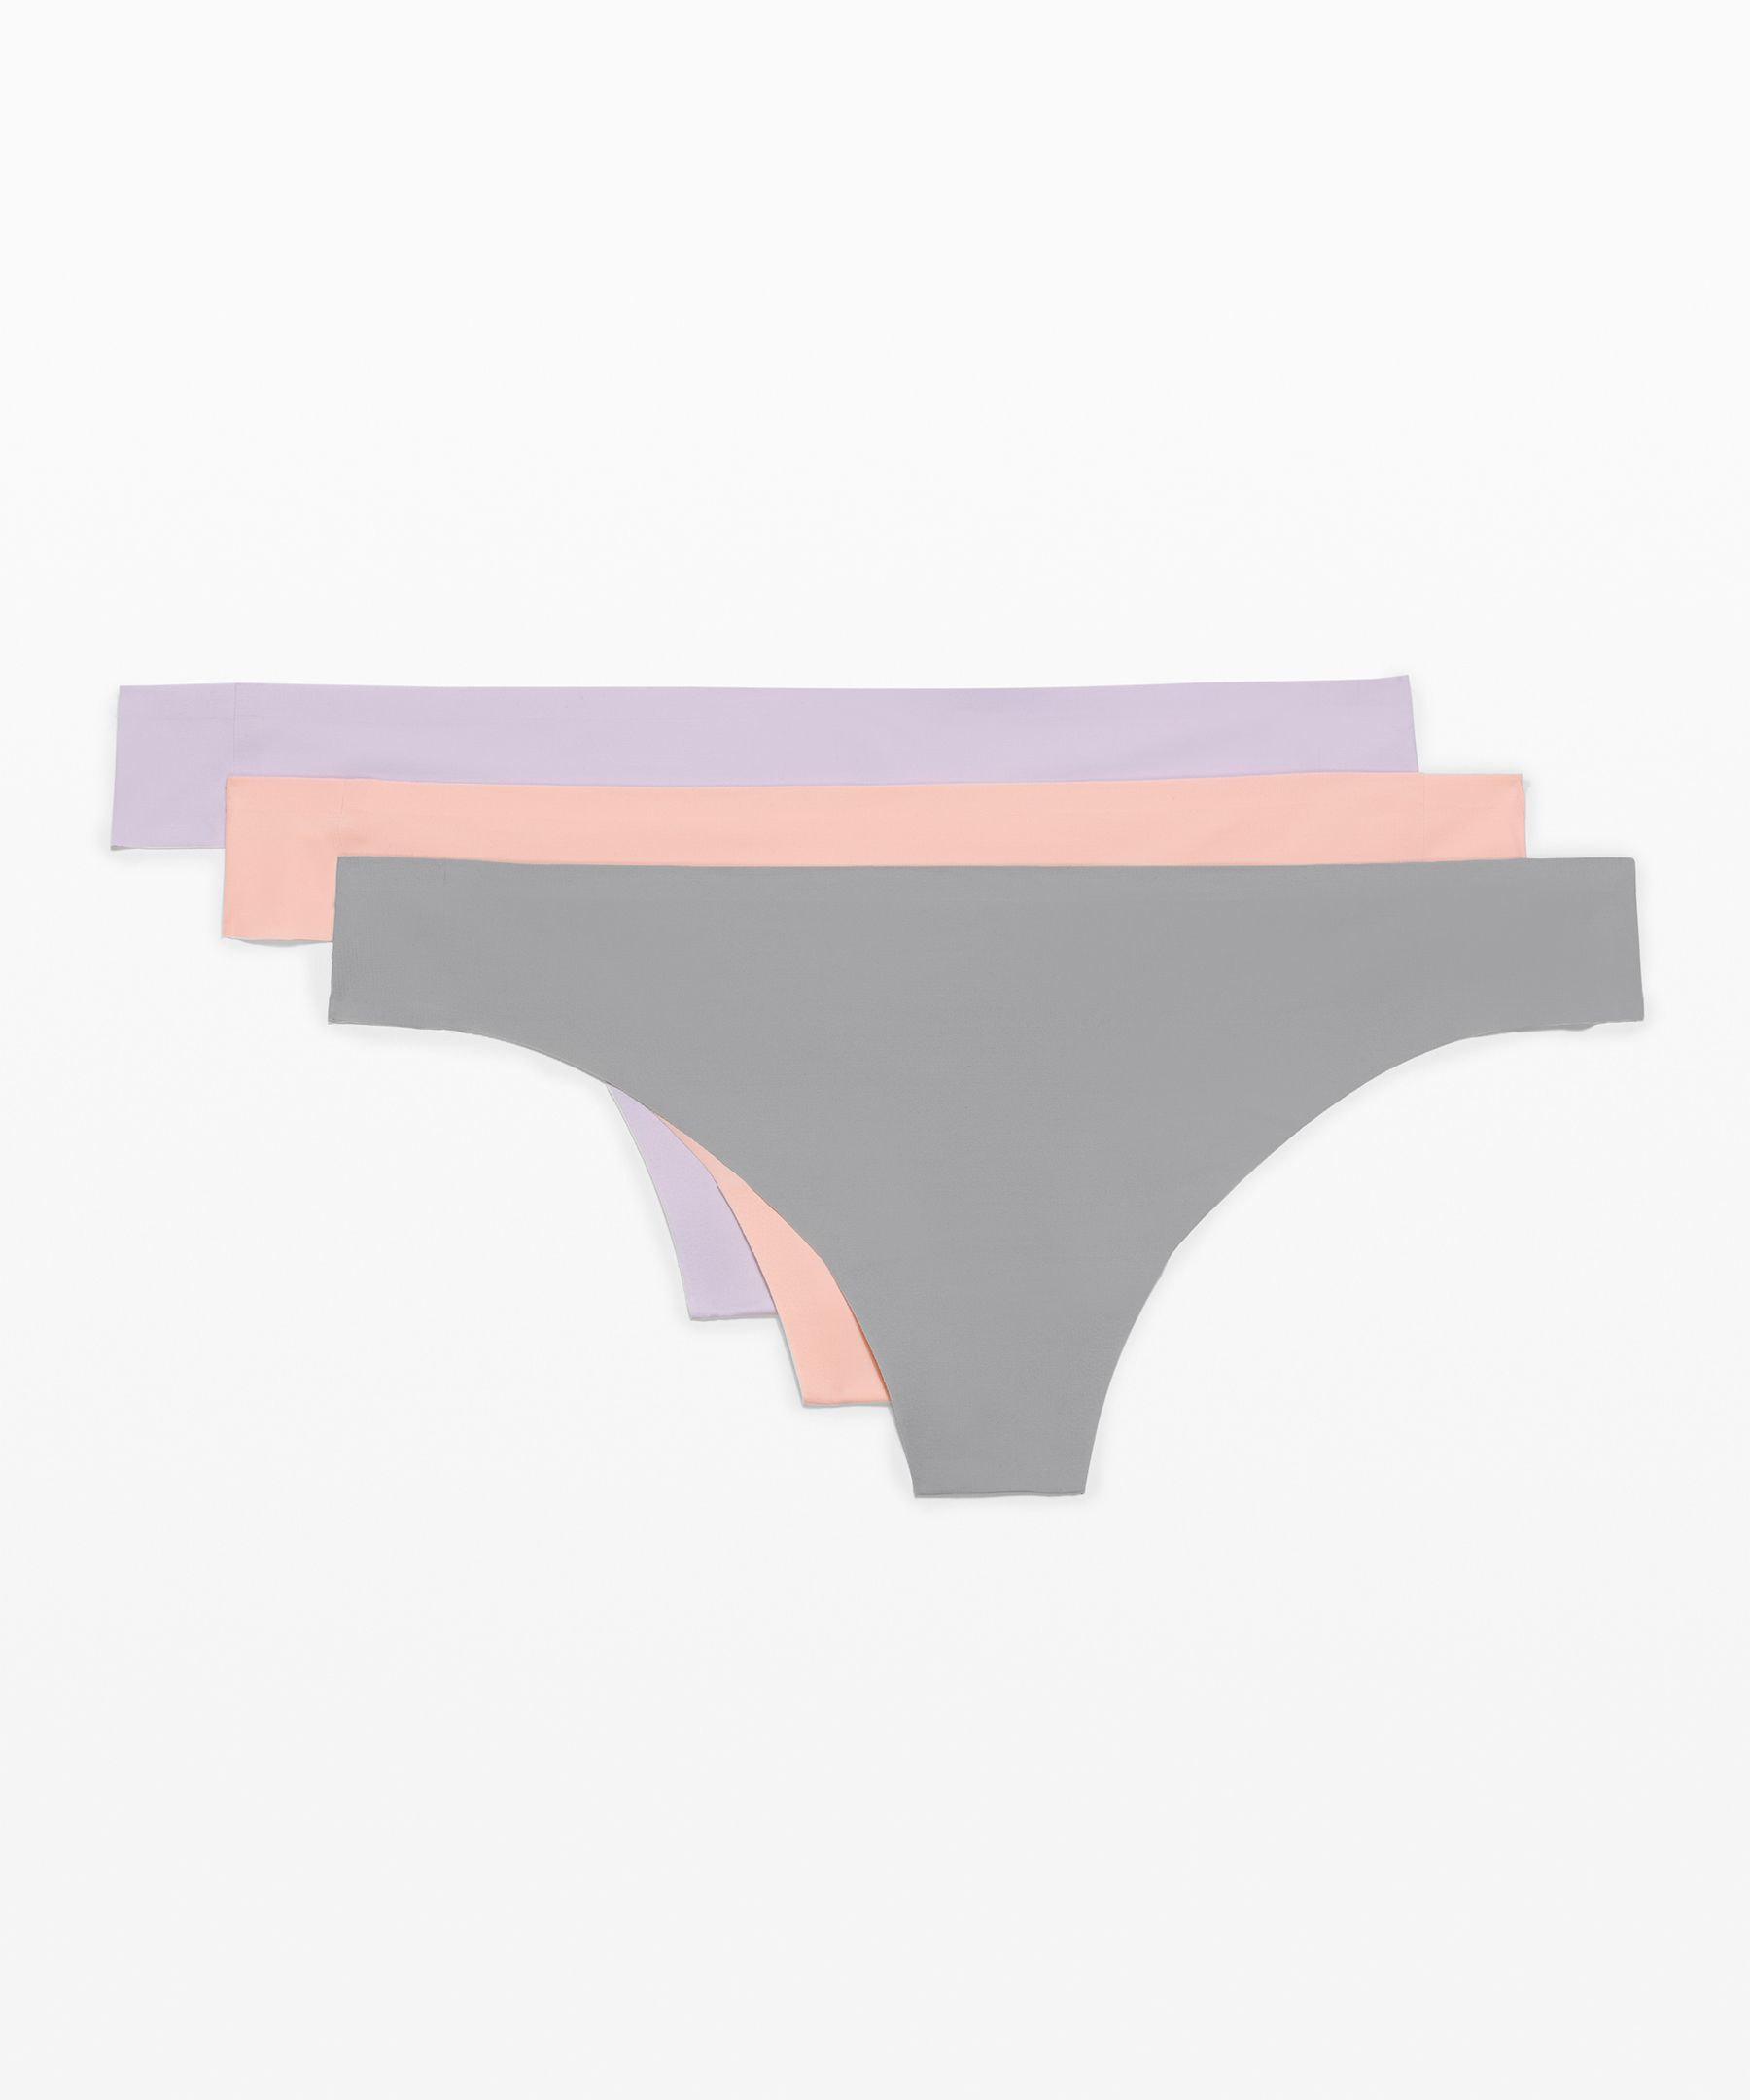 Victoria's Secret PINK Seamless Thong Panty **select color**